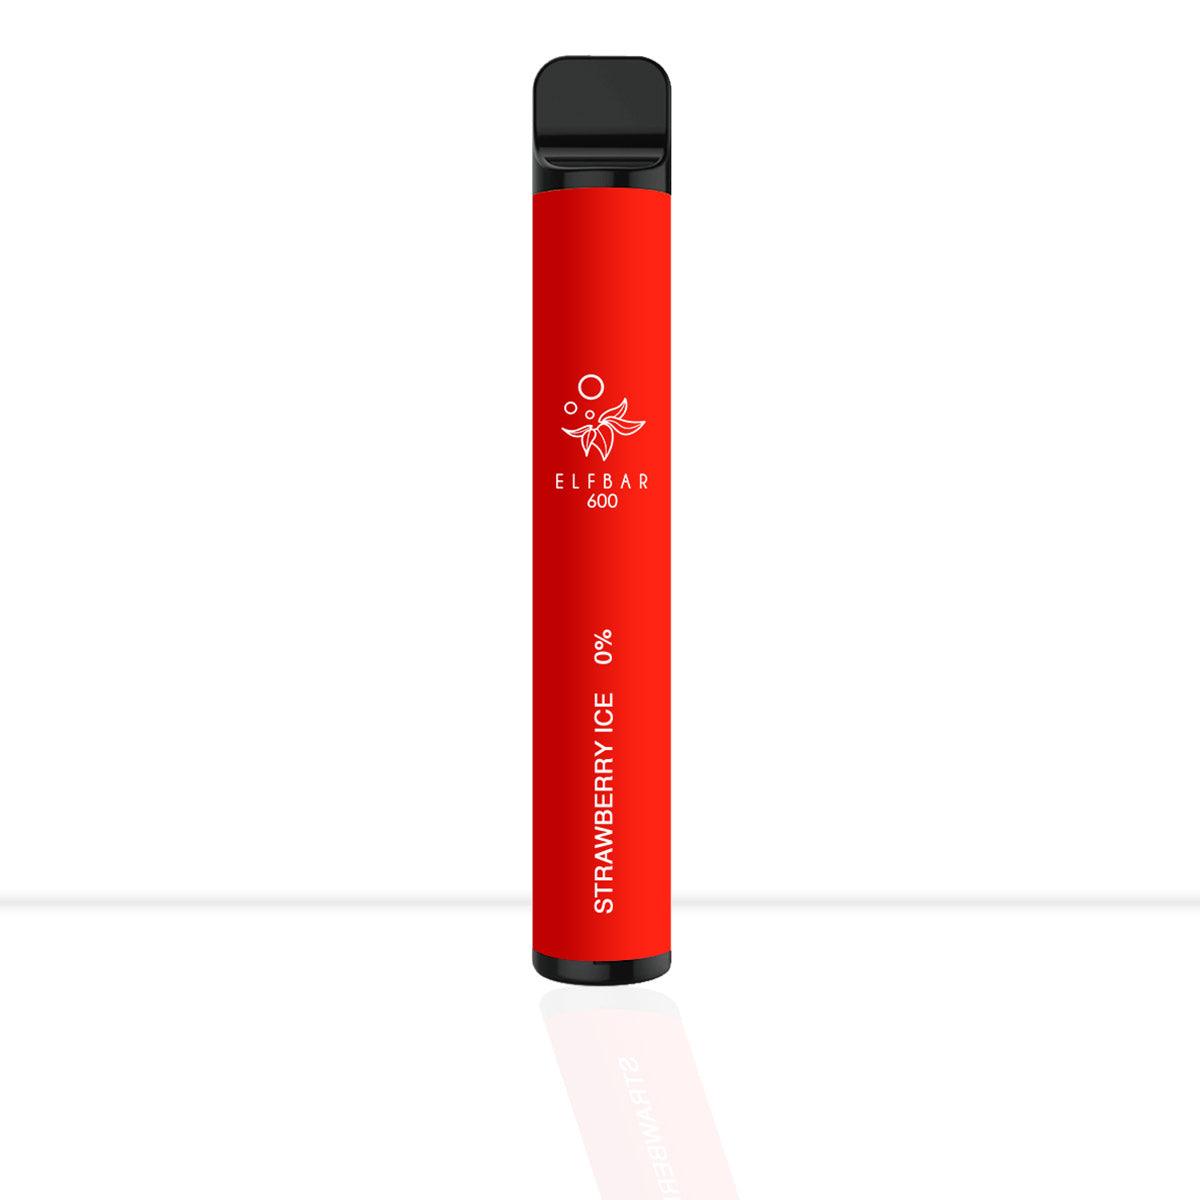 A red disposable vape device